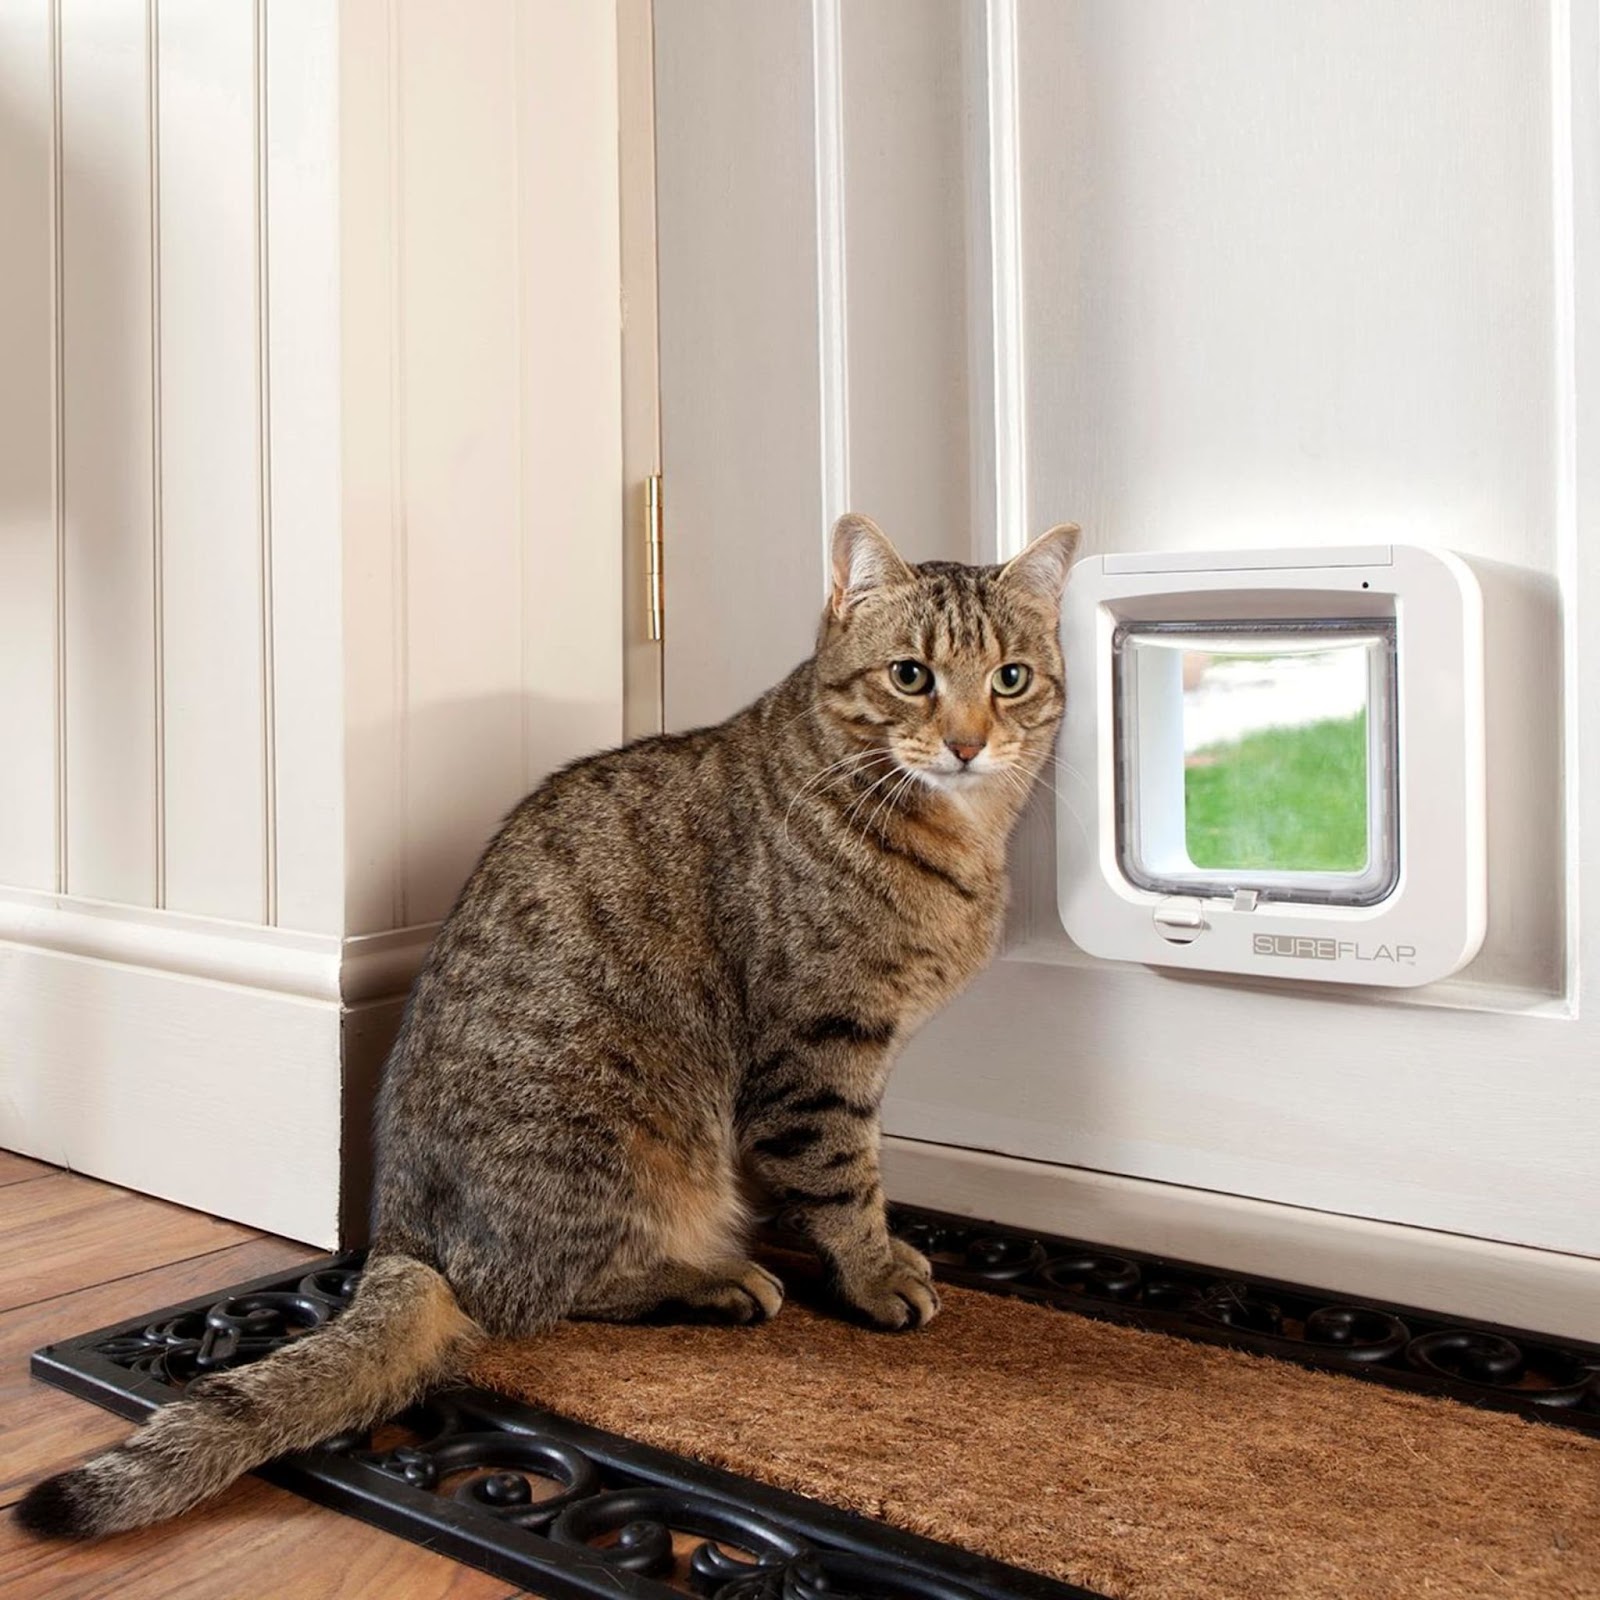 Reasons to install a cat flap